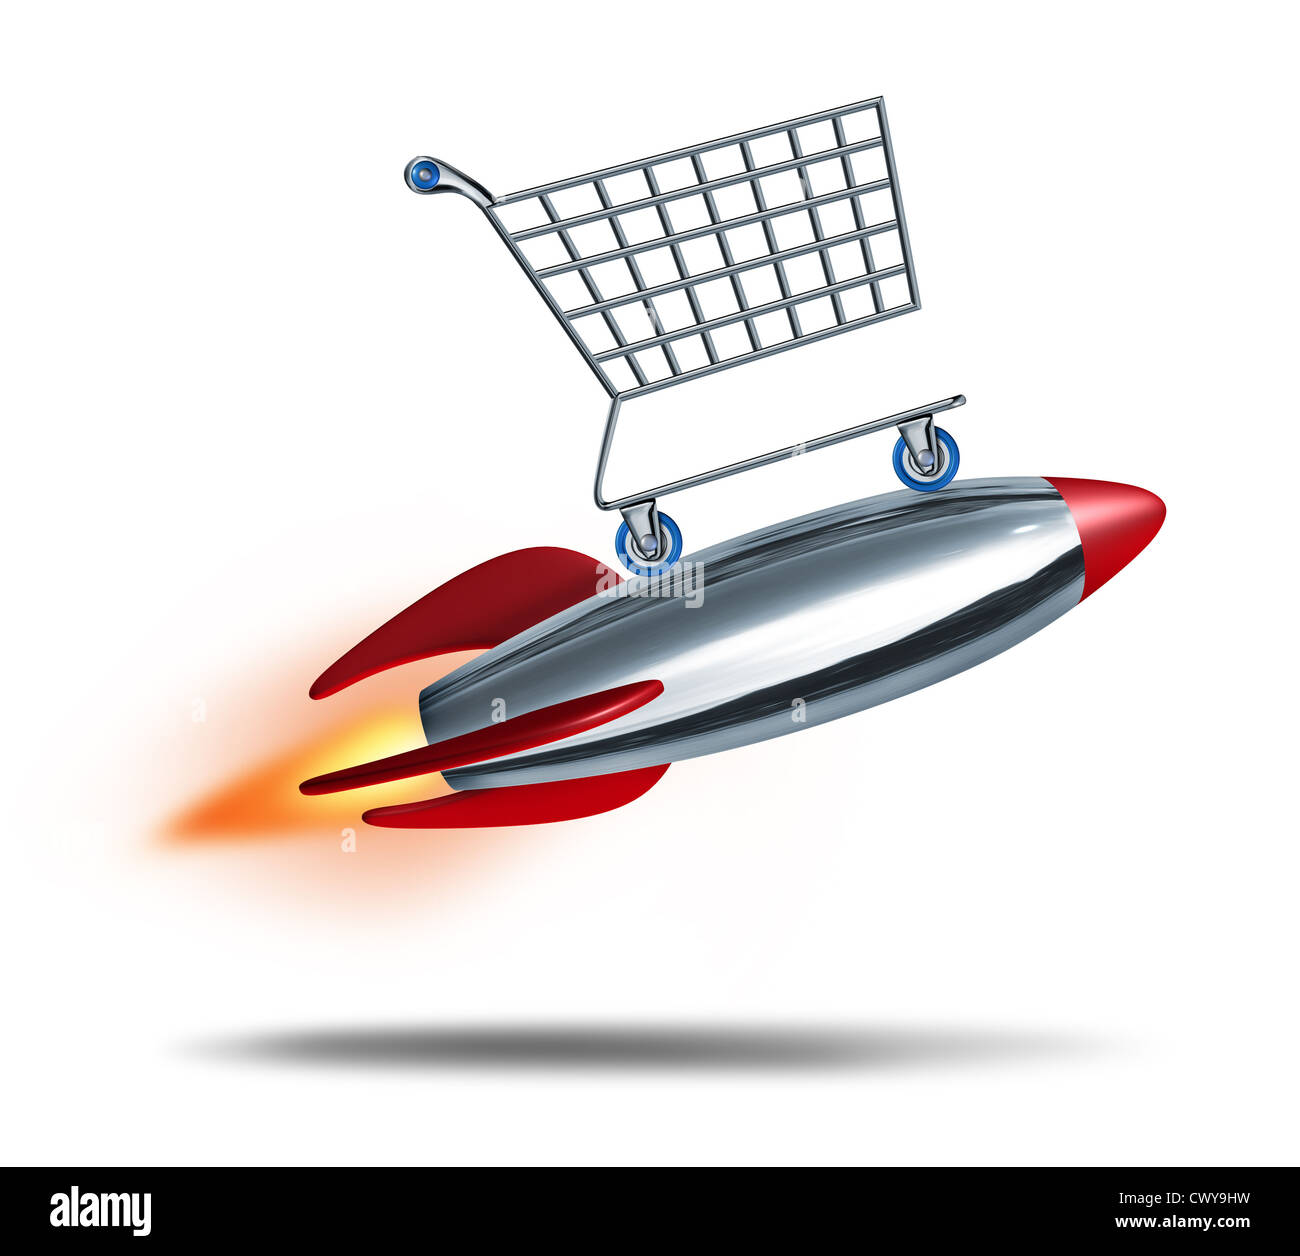 Speed shopping and quick check out concept with a shop cart flying in the air with a rocket blast as a symbol of fast consumer sales service on a white background. Stock Photo